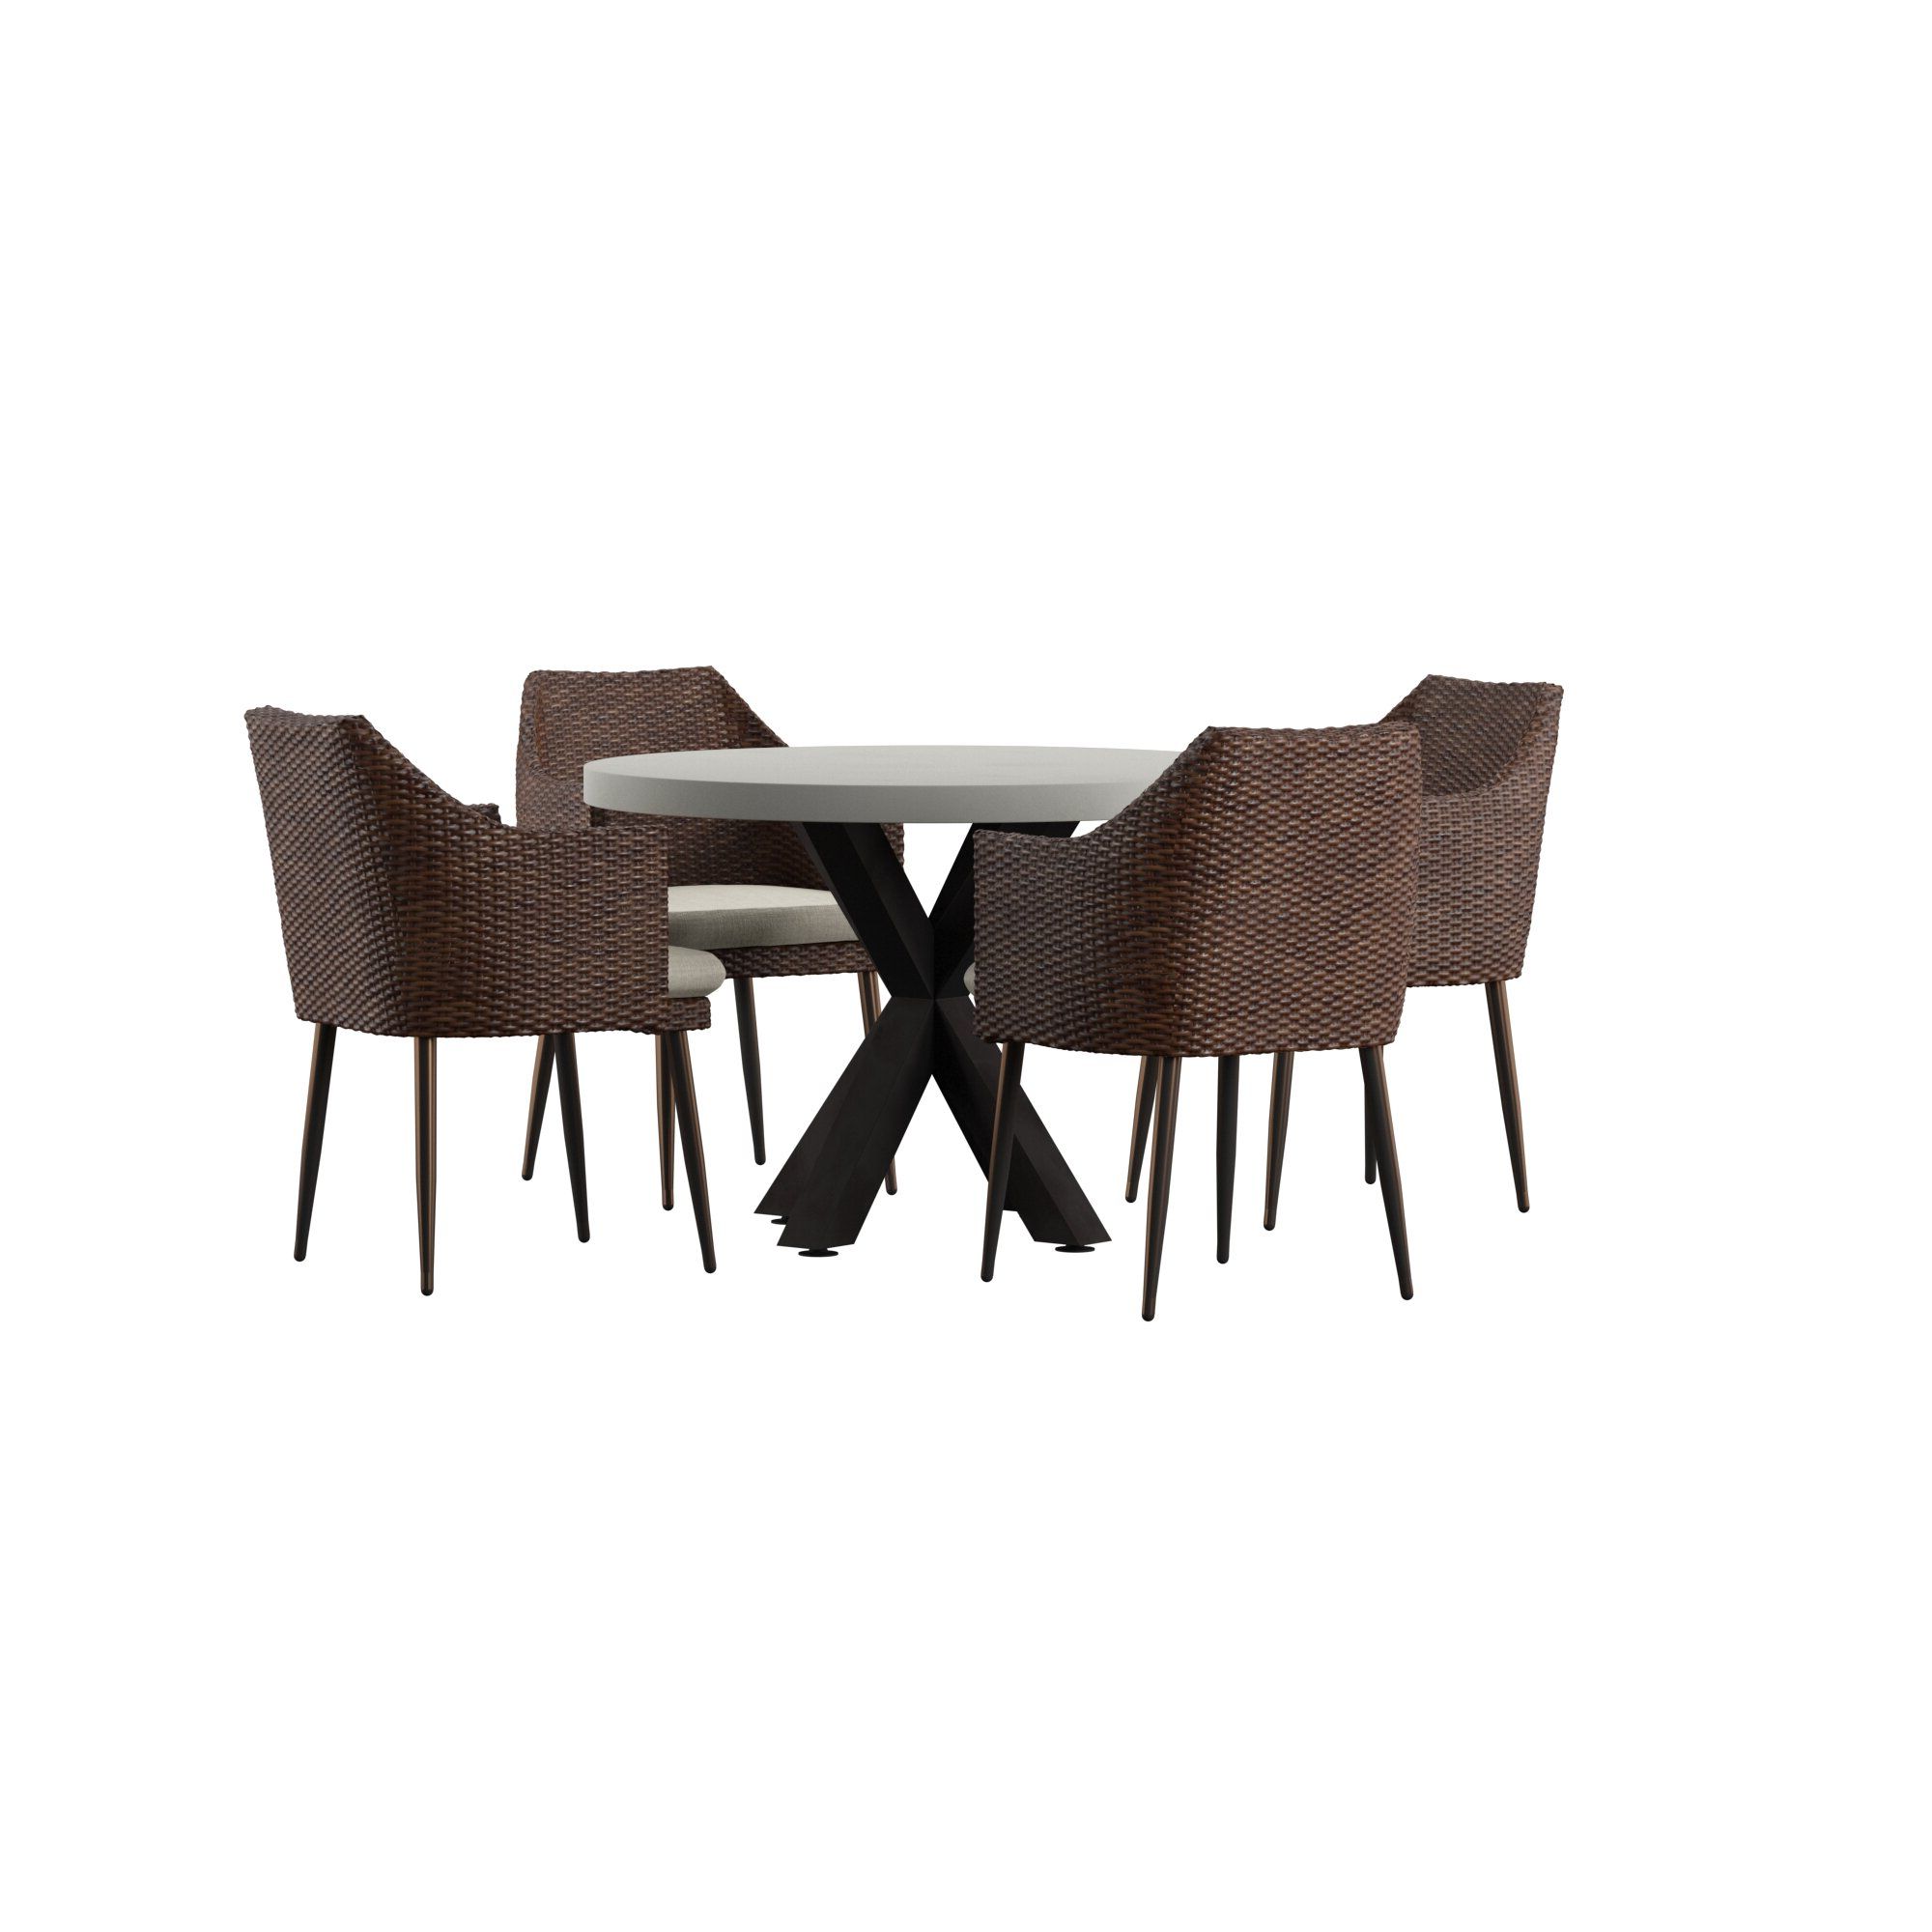 Well Liked Avery 5 Piece Dining Set With Cushions Pertaining To Avery Rectangular Dining Tables (View 19 of 25)